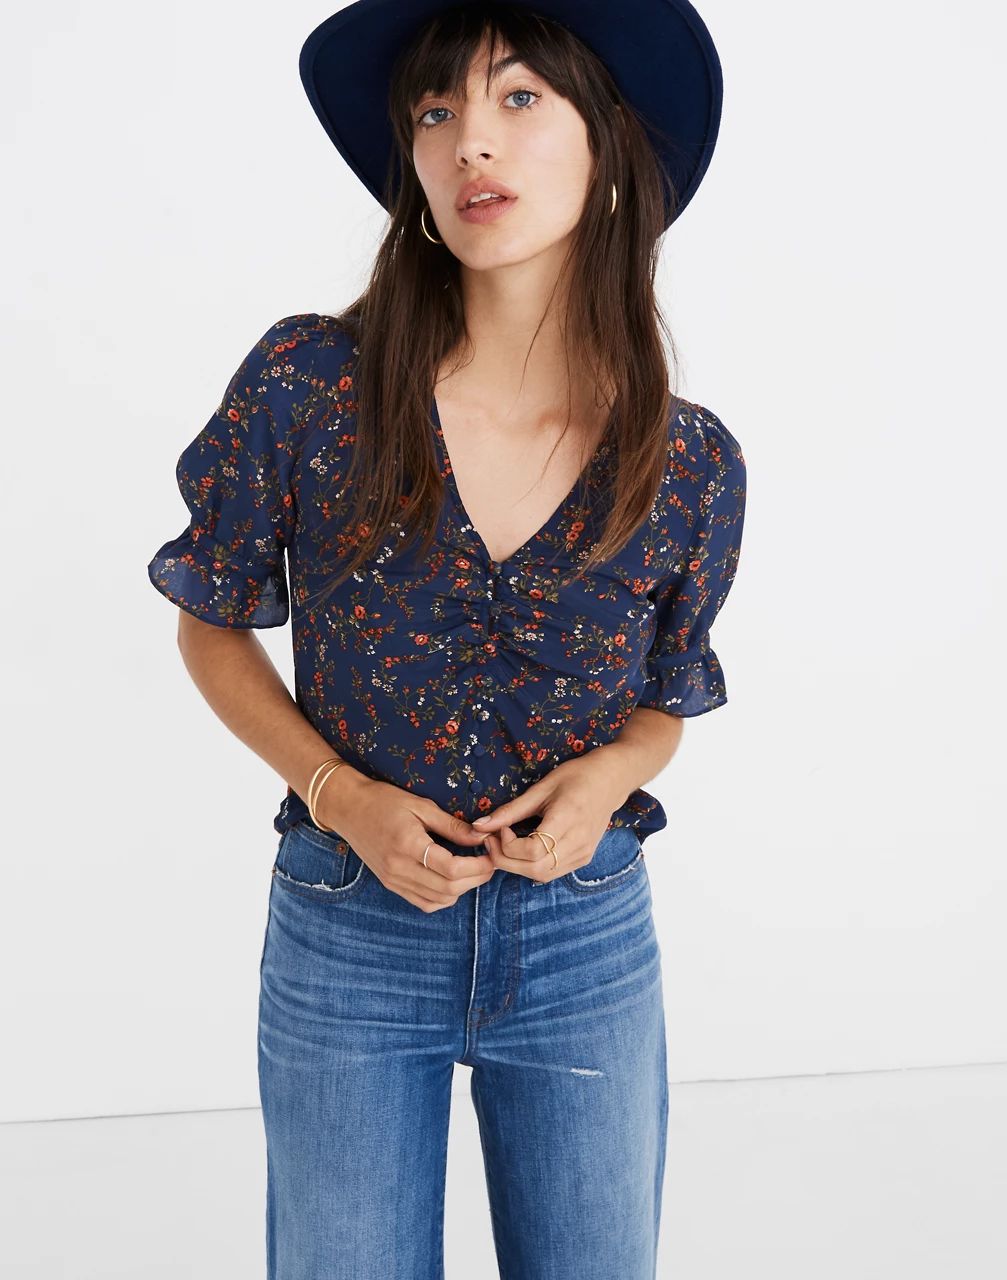 Silk Daylight Top in Moonless Floral | Madewell